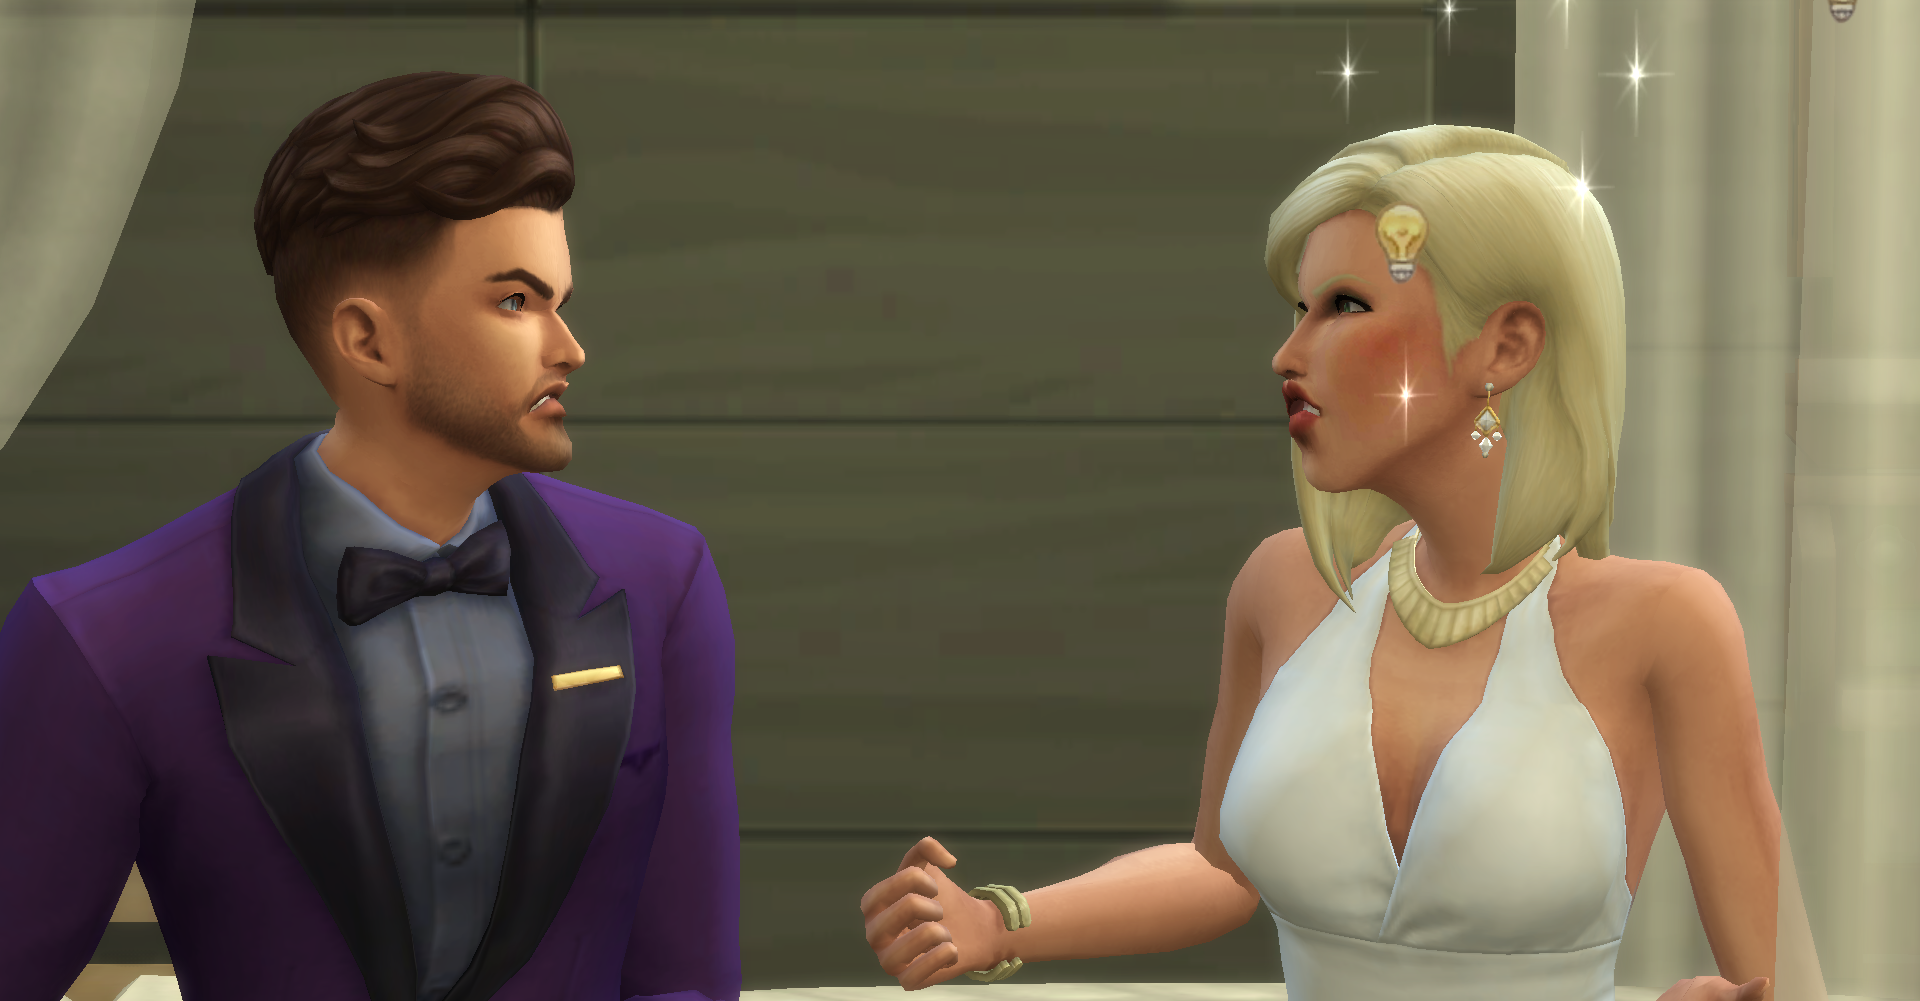 Hot Complications Sims Story Page 5 The Sims 4 General Discussion 5769